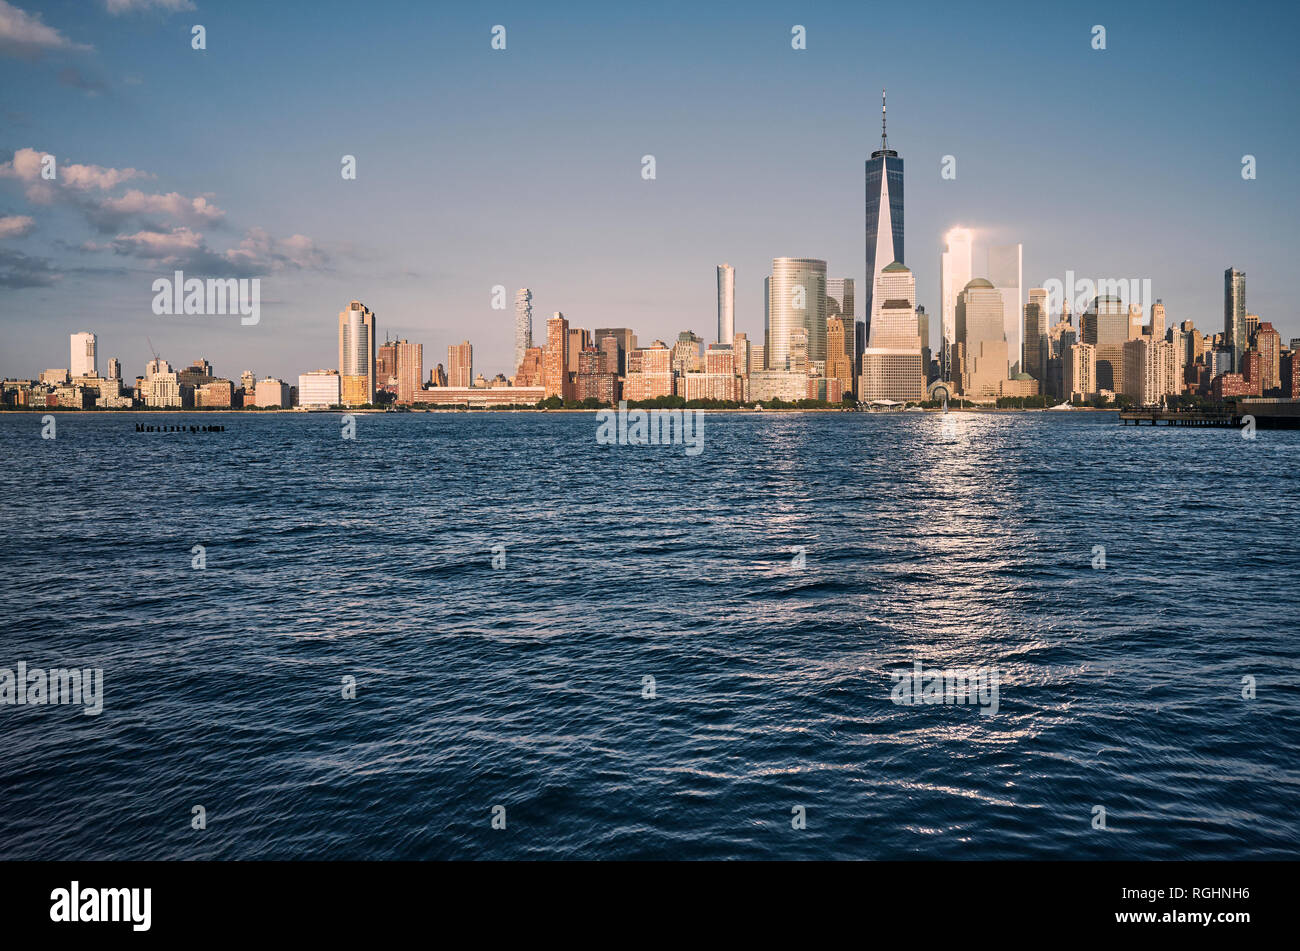 Manhattan skyline at sunset, color toning applied, USA. Stock Photo